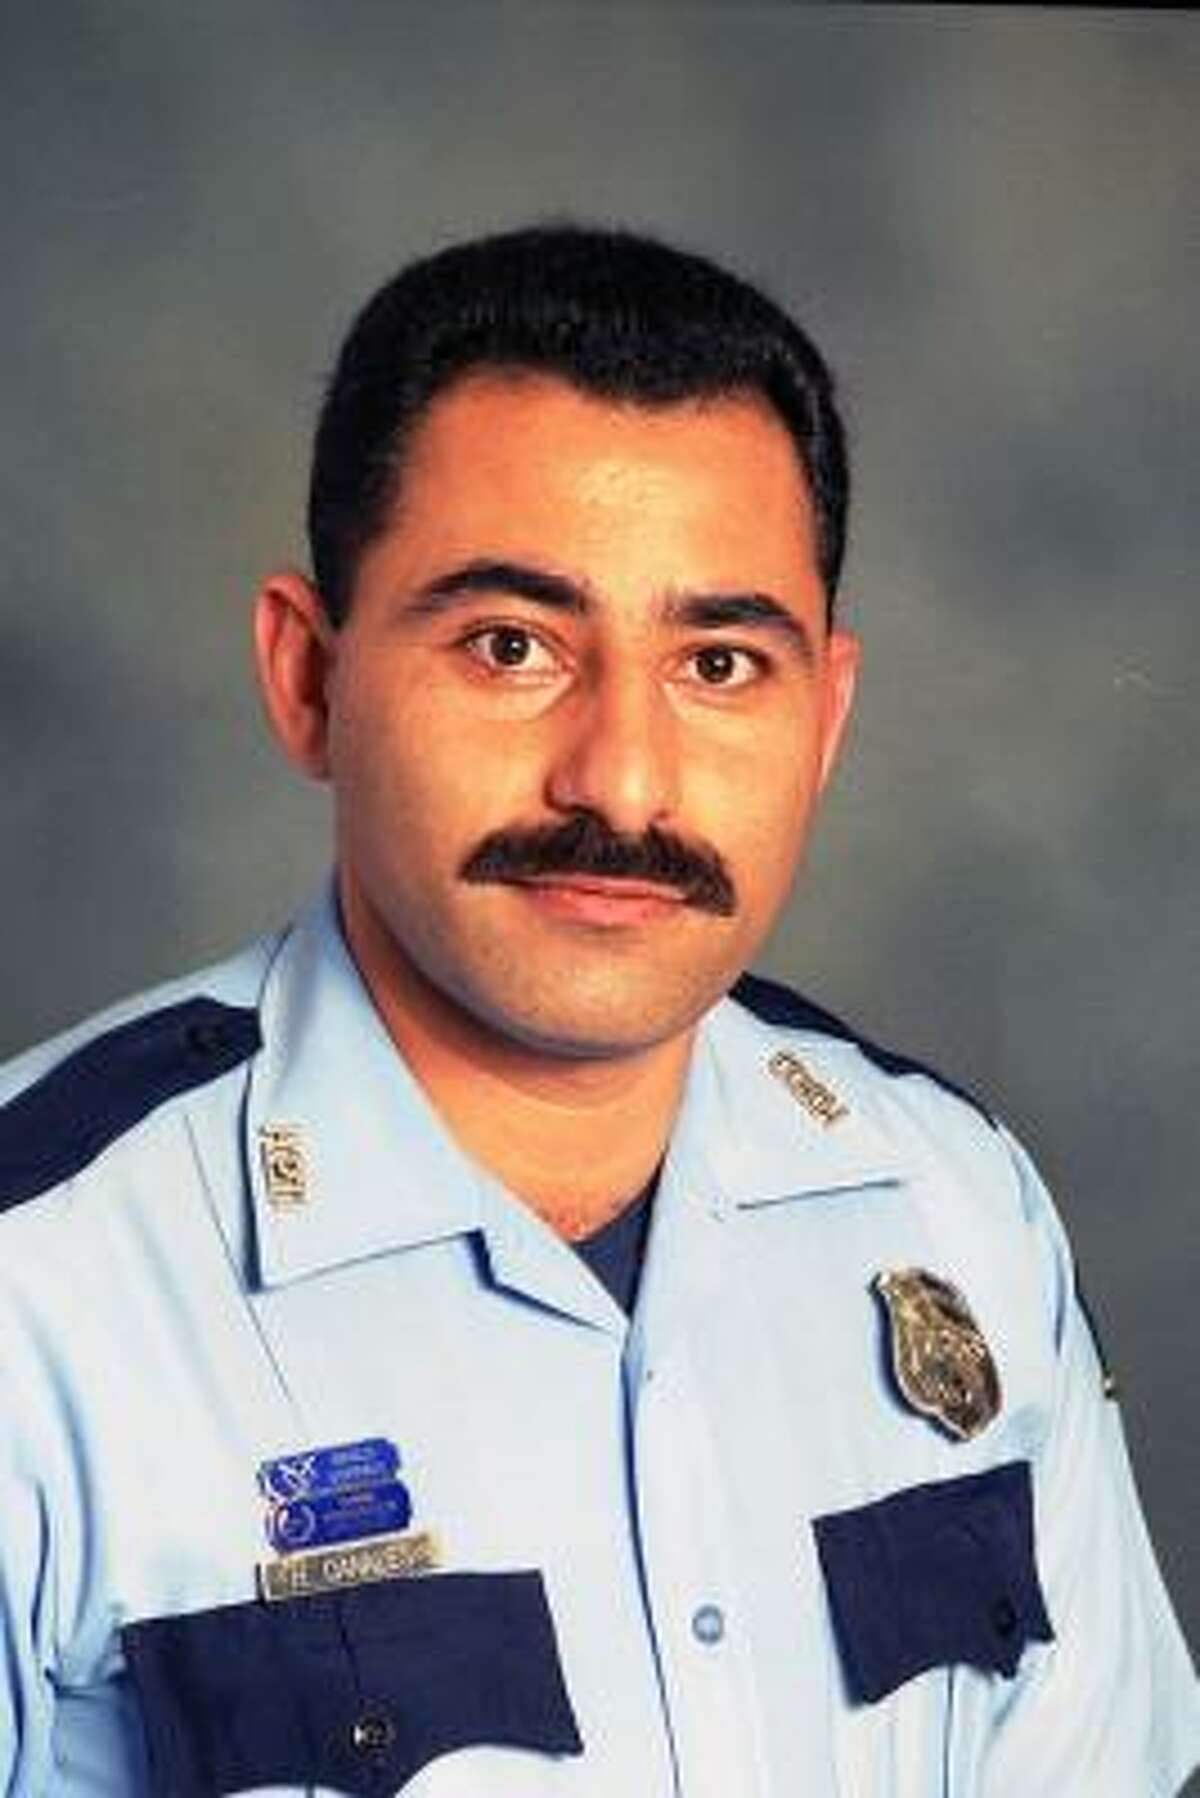 Houston Police Department Senior Officer Henry Canales.